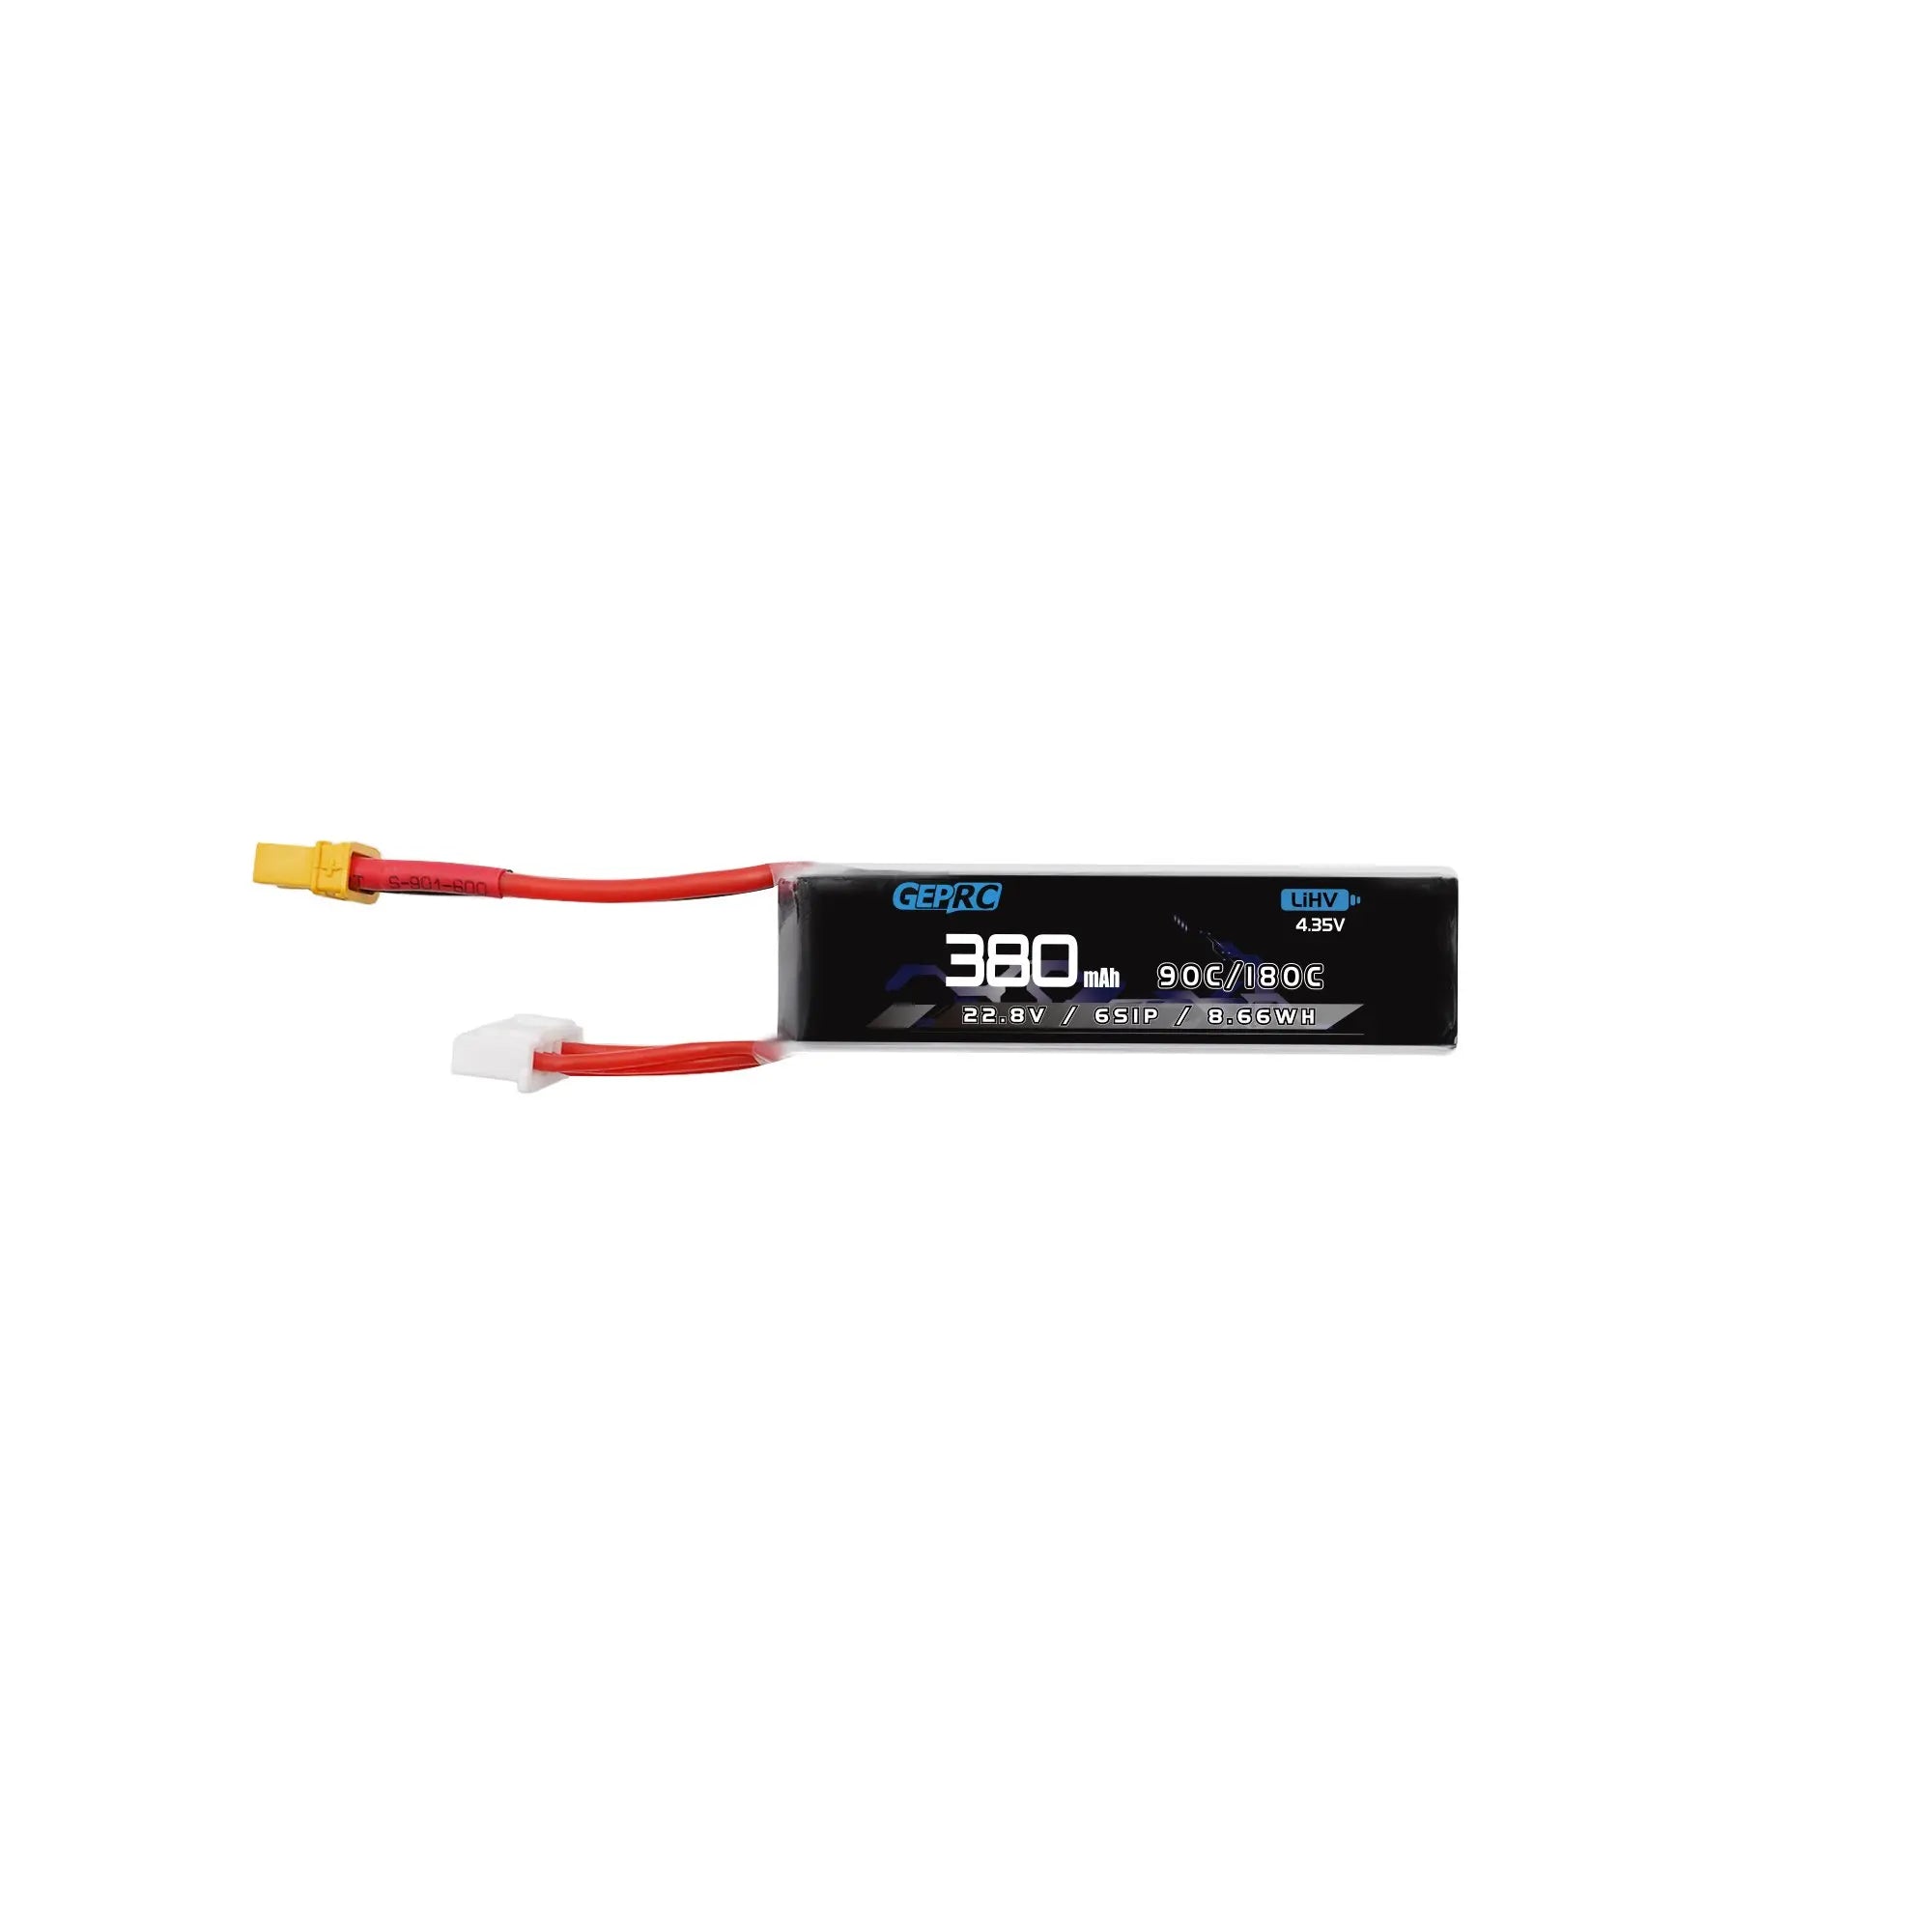 GEPRC 6S 380mAh Battery, don’t place the battery close to open flames or fire sources